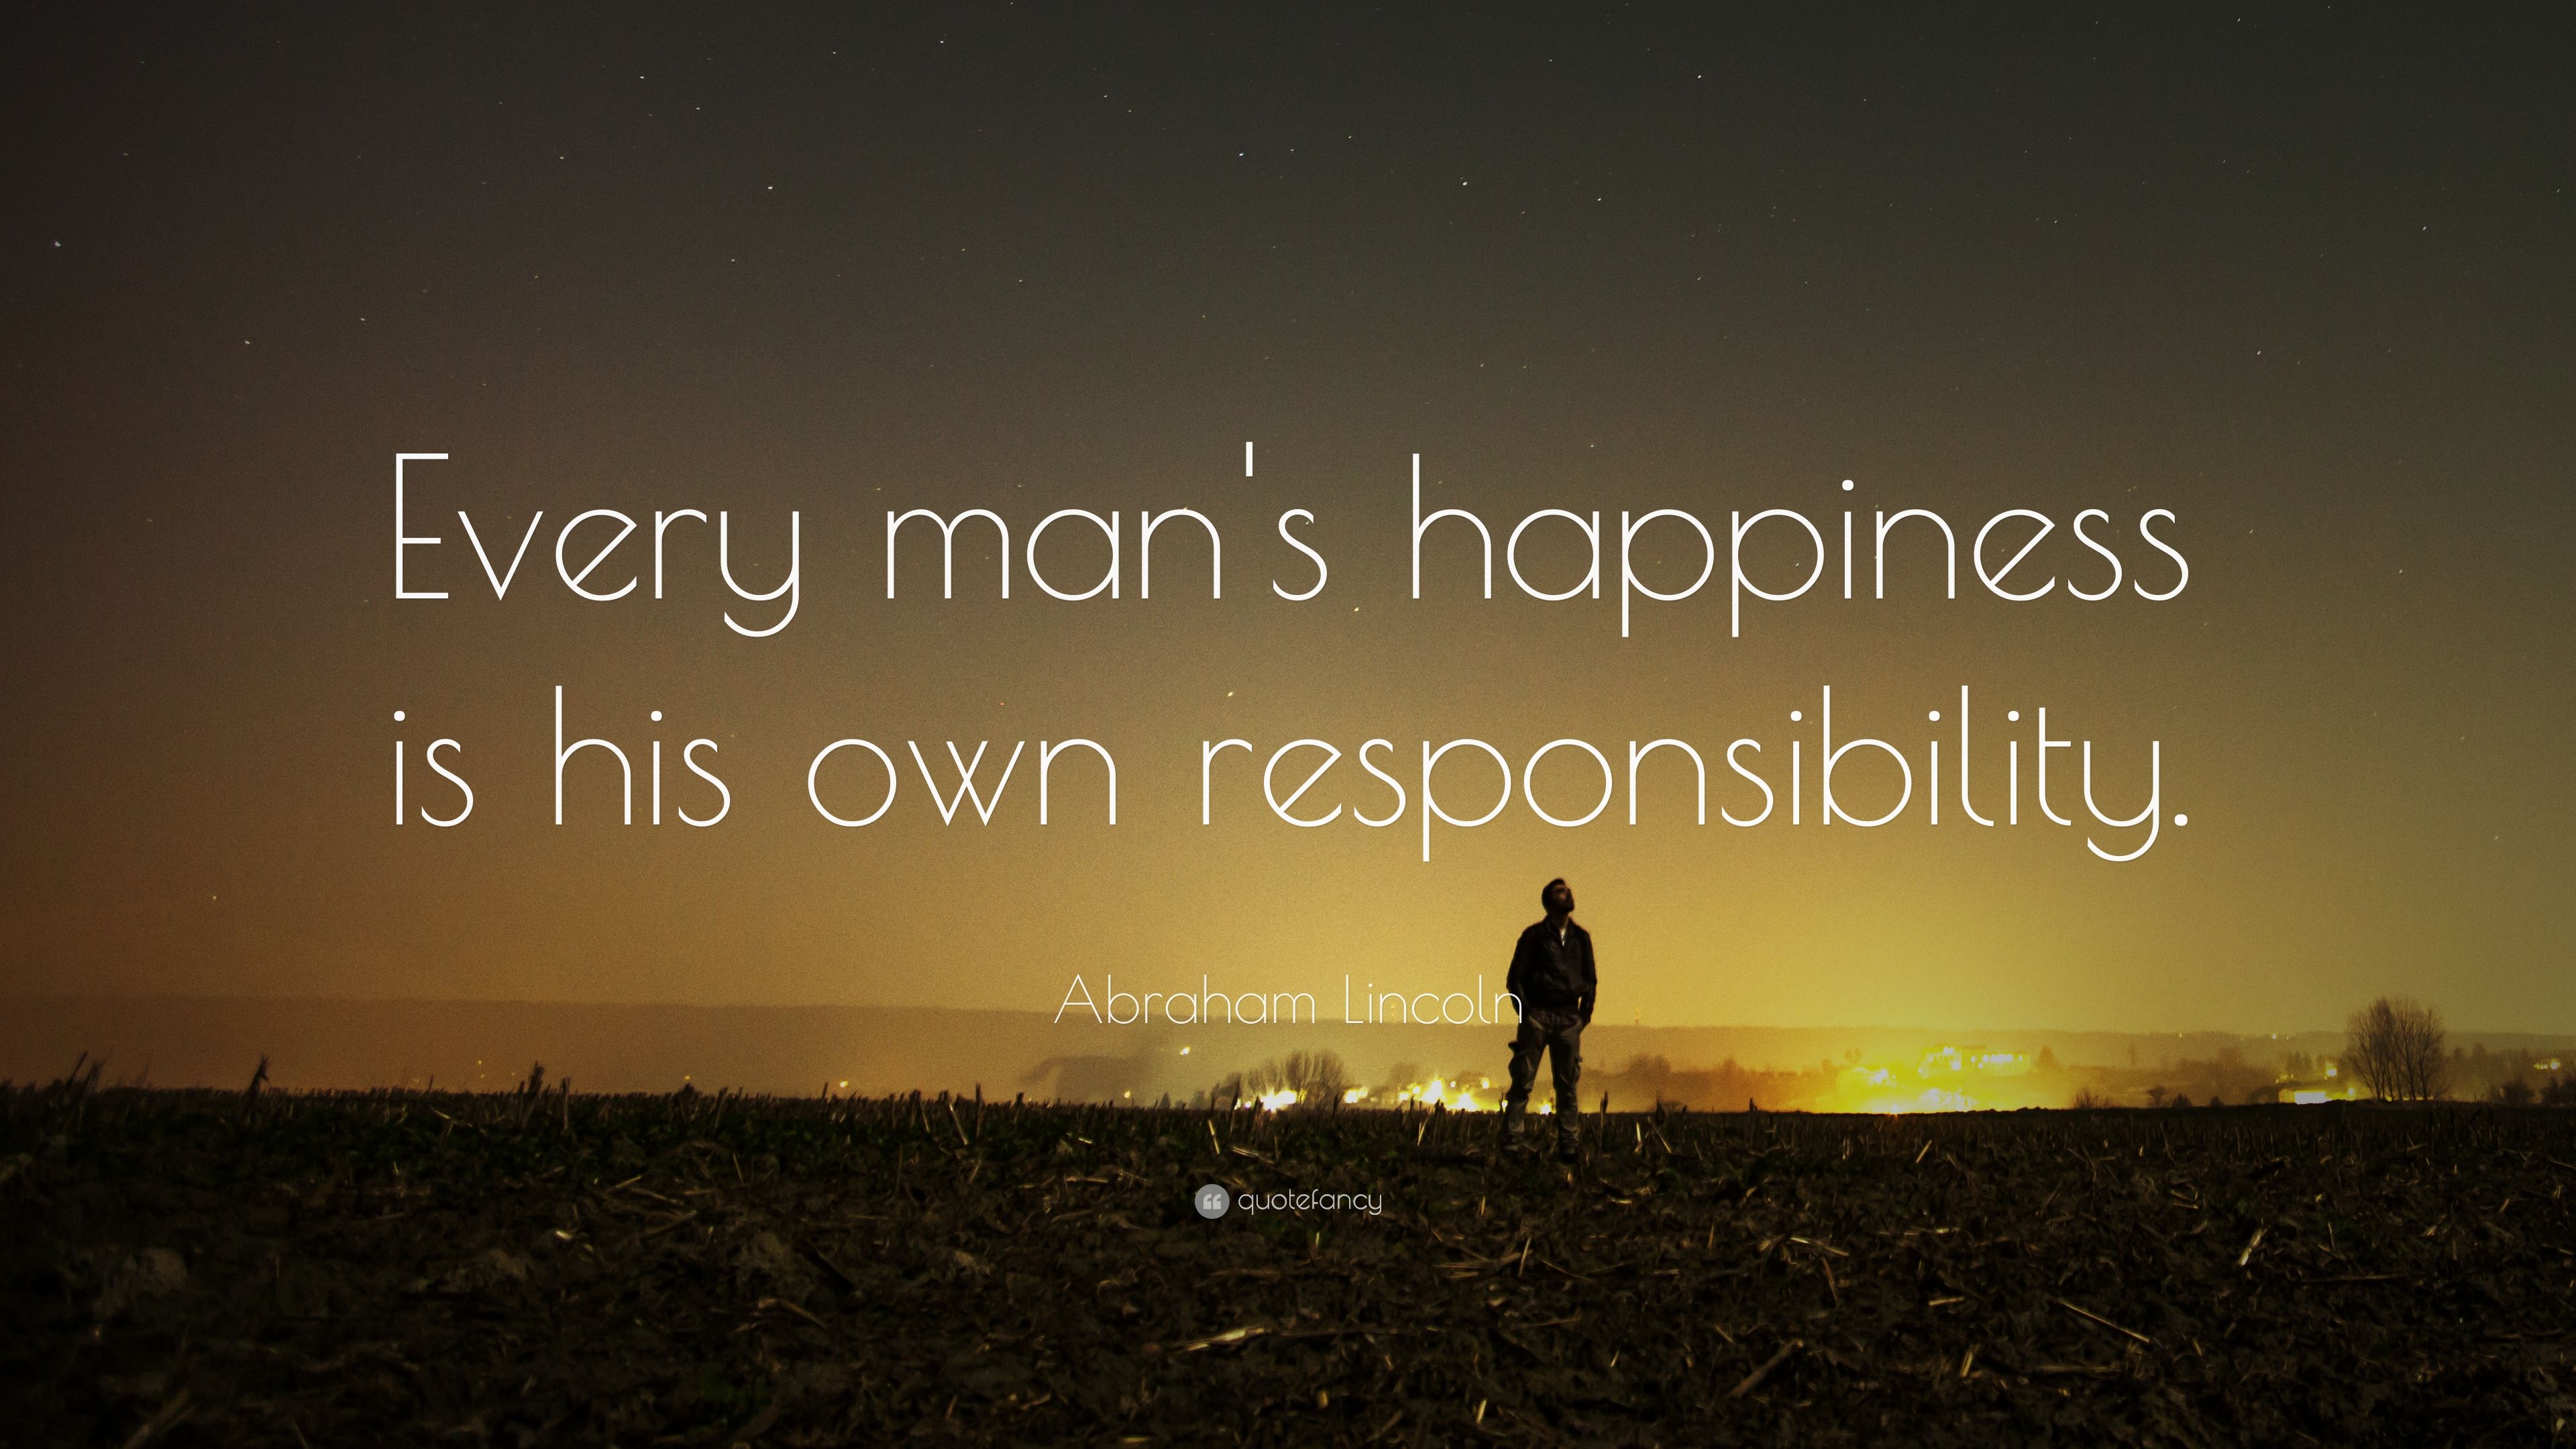 Abraham Lincoln Quote: “Every man's happiness is his own responsibility.” (21 wallpaper)